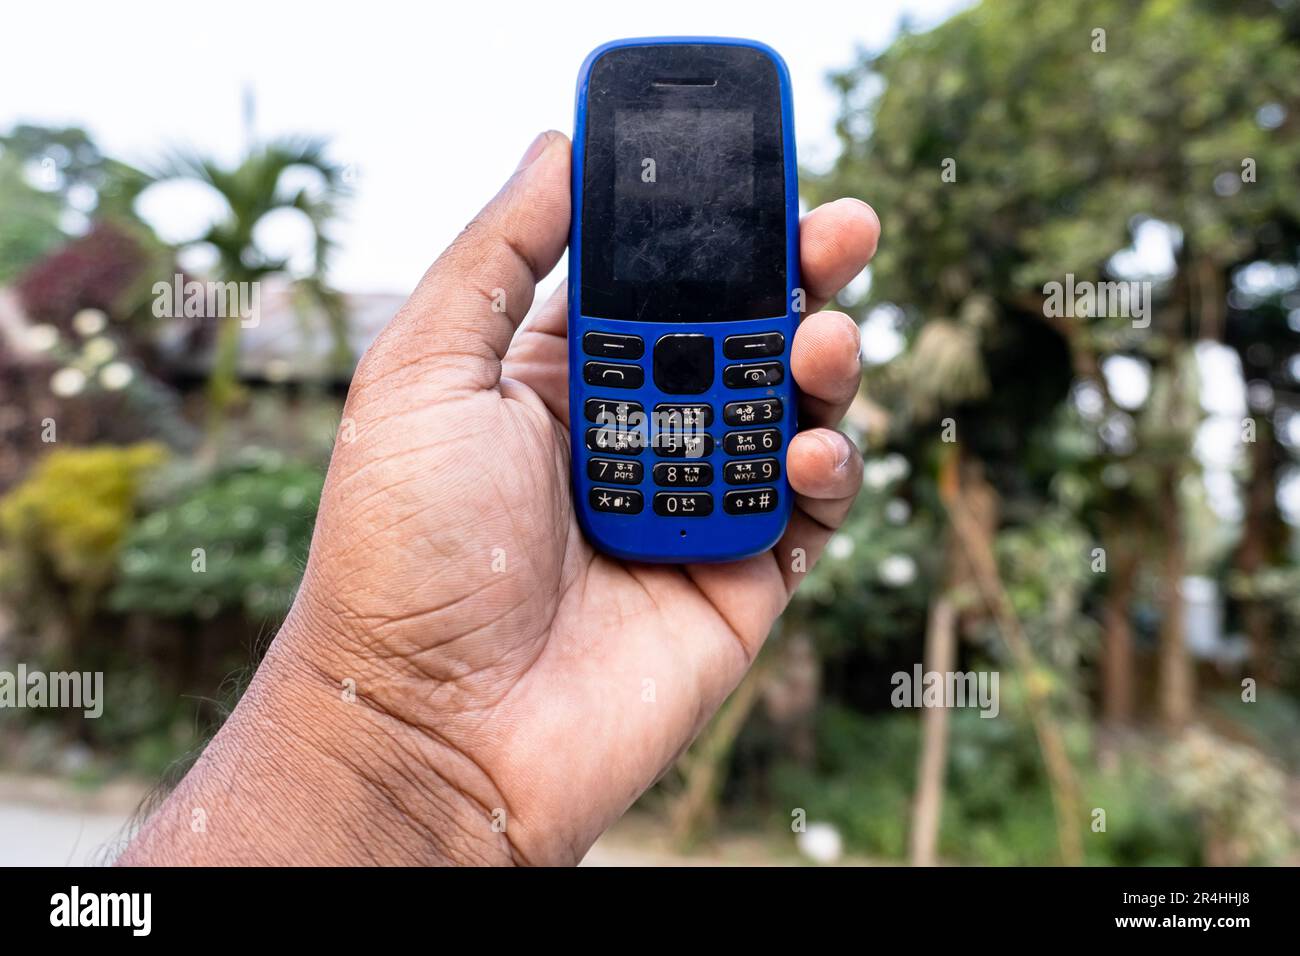 A button phone on hand isolated on a natural background Stock Photo